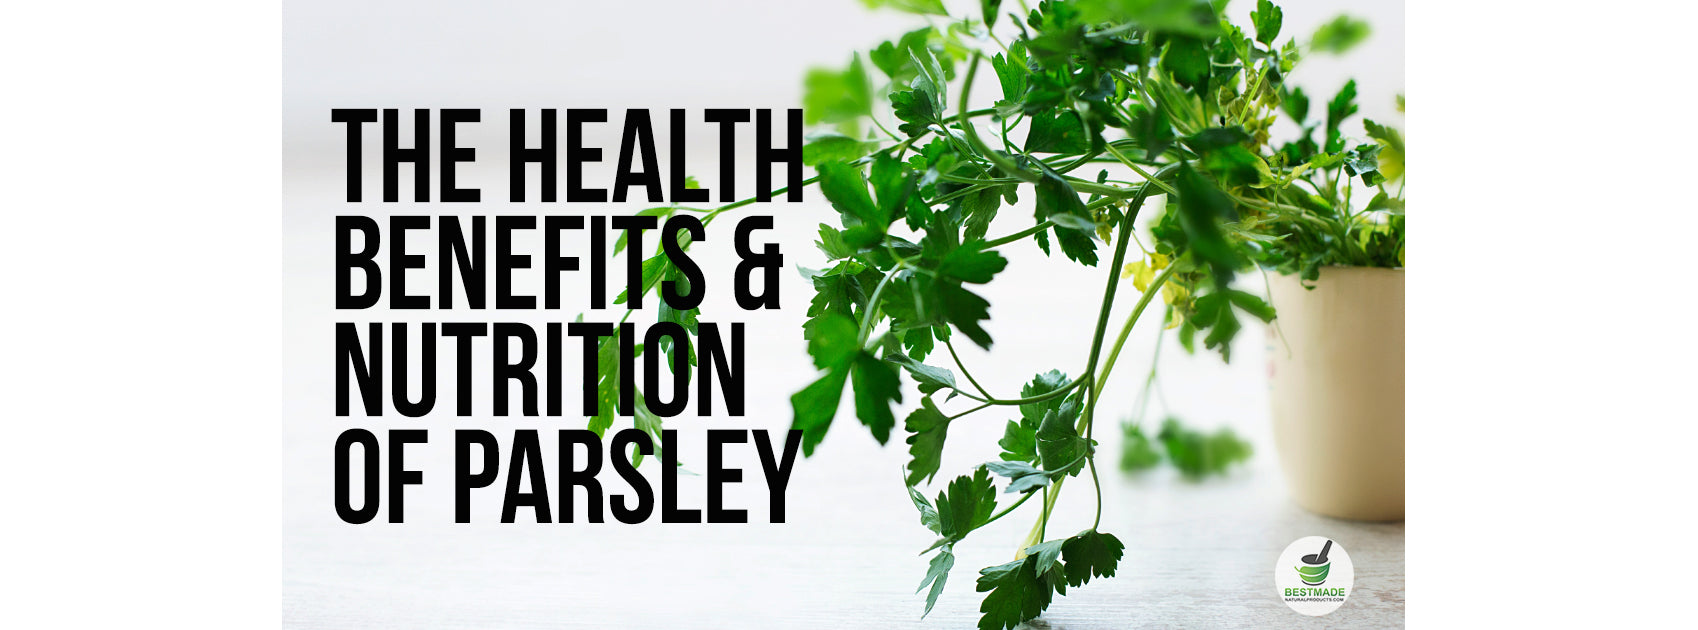 The Health Benefits And Nutrition Of Parsley